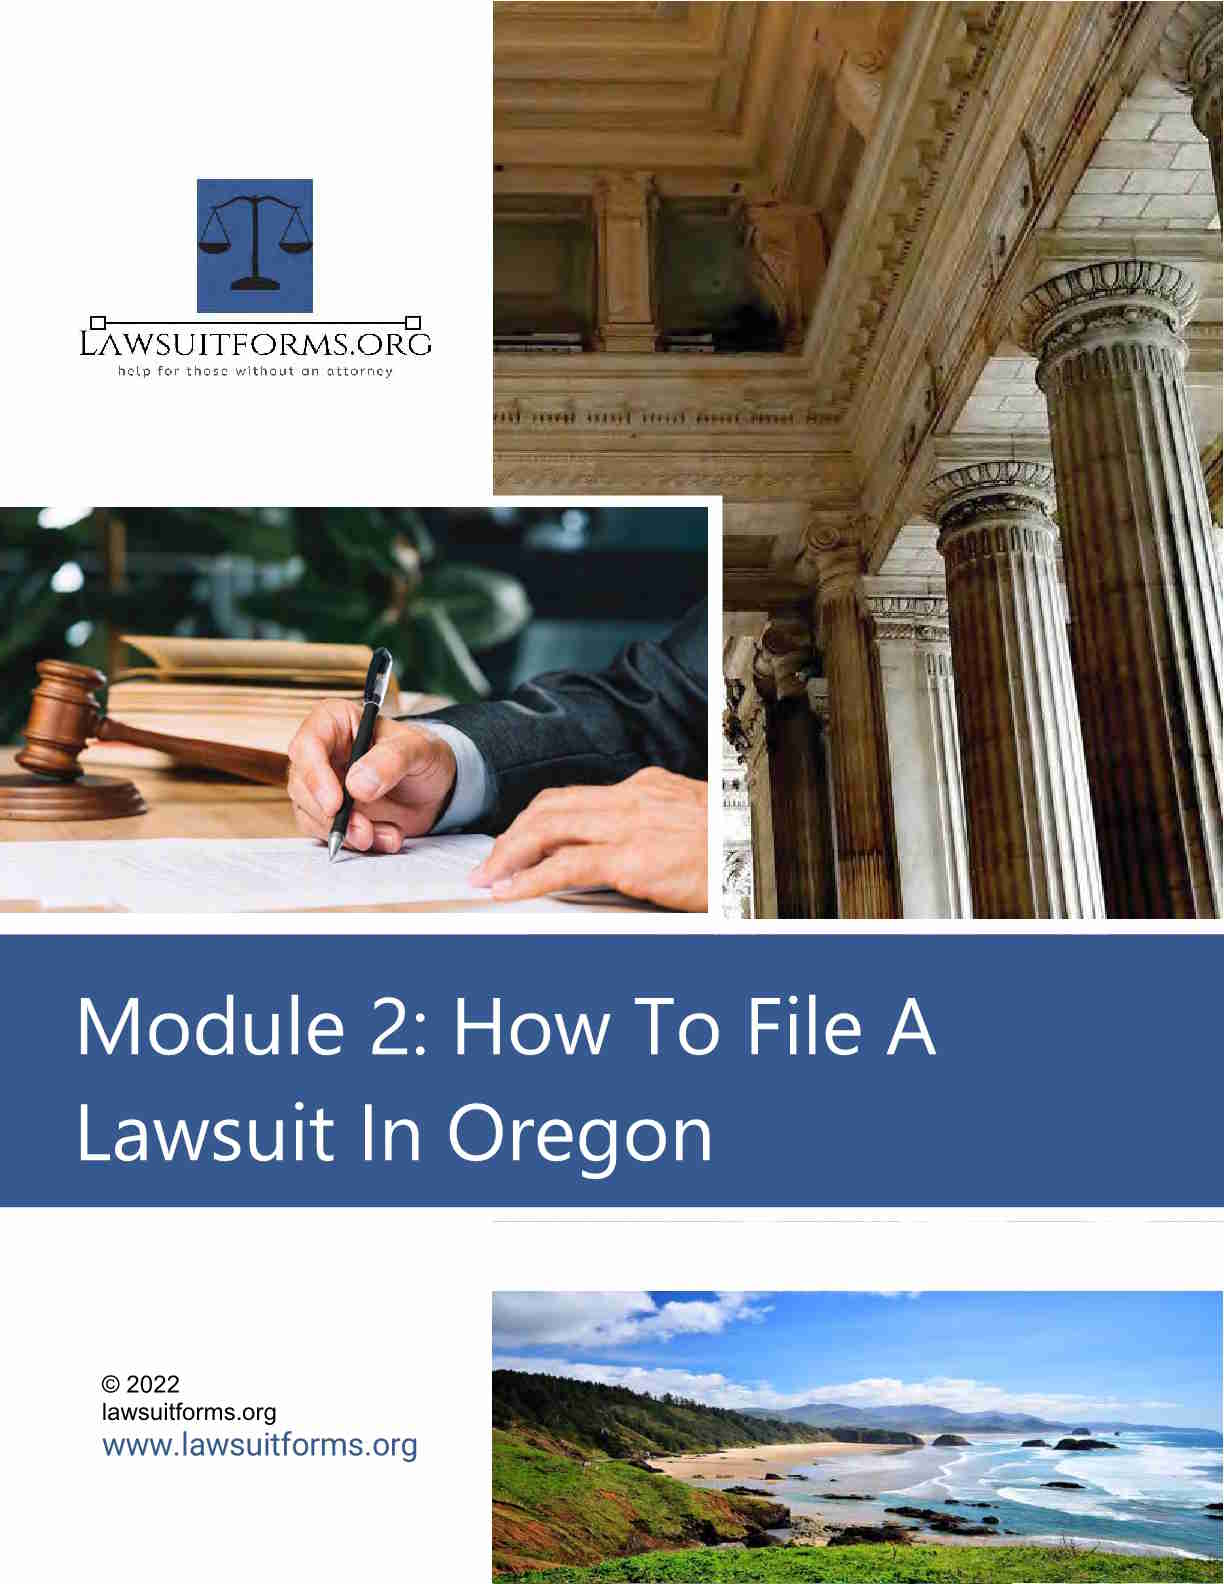 How to file a lawsuit in Oregon